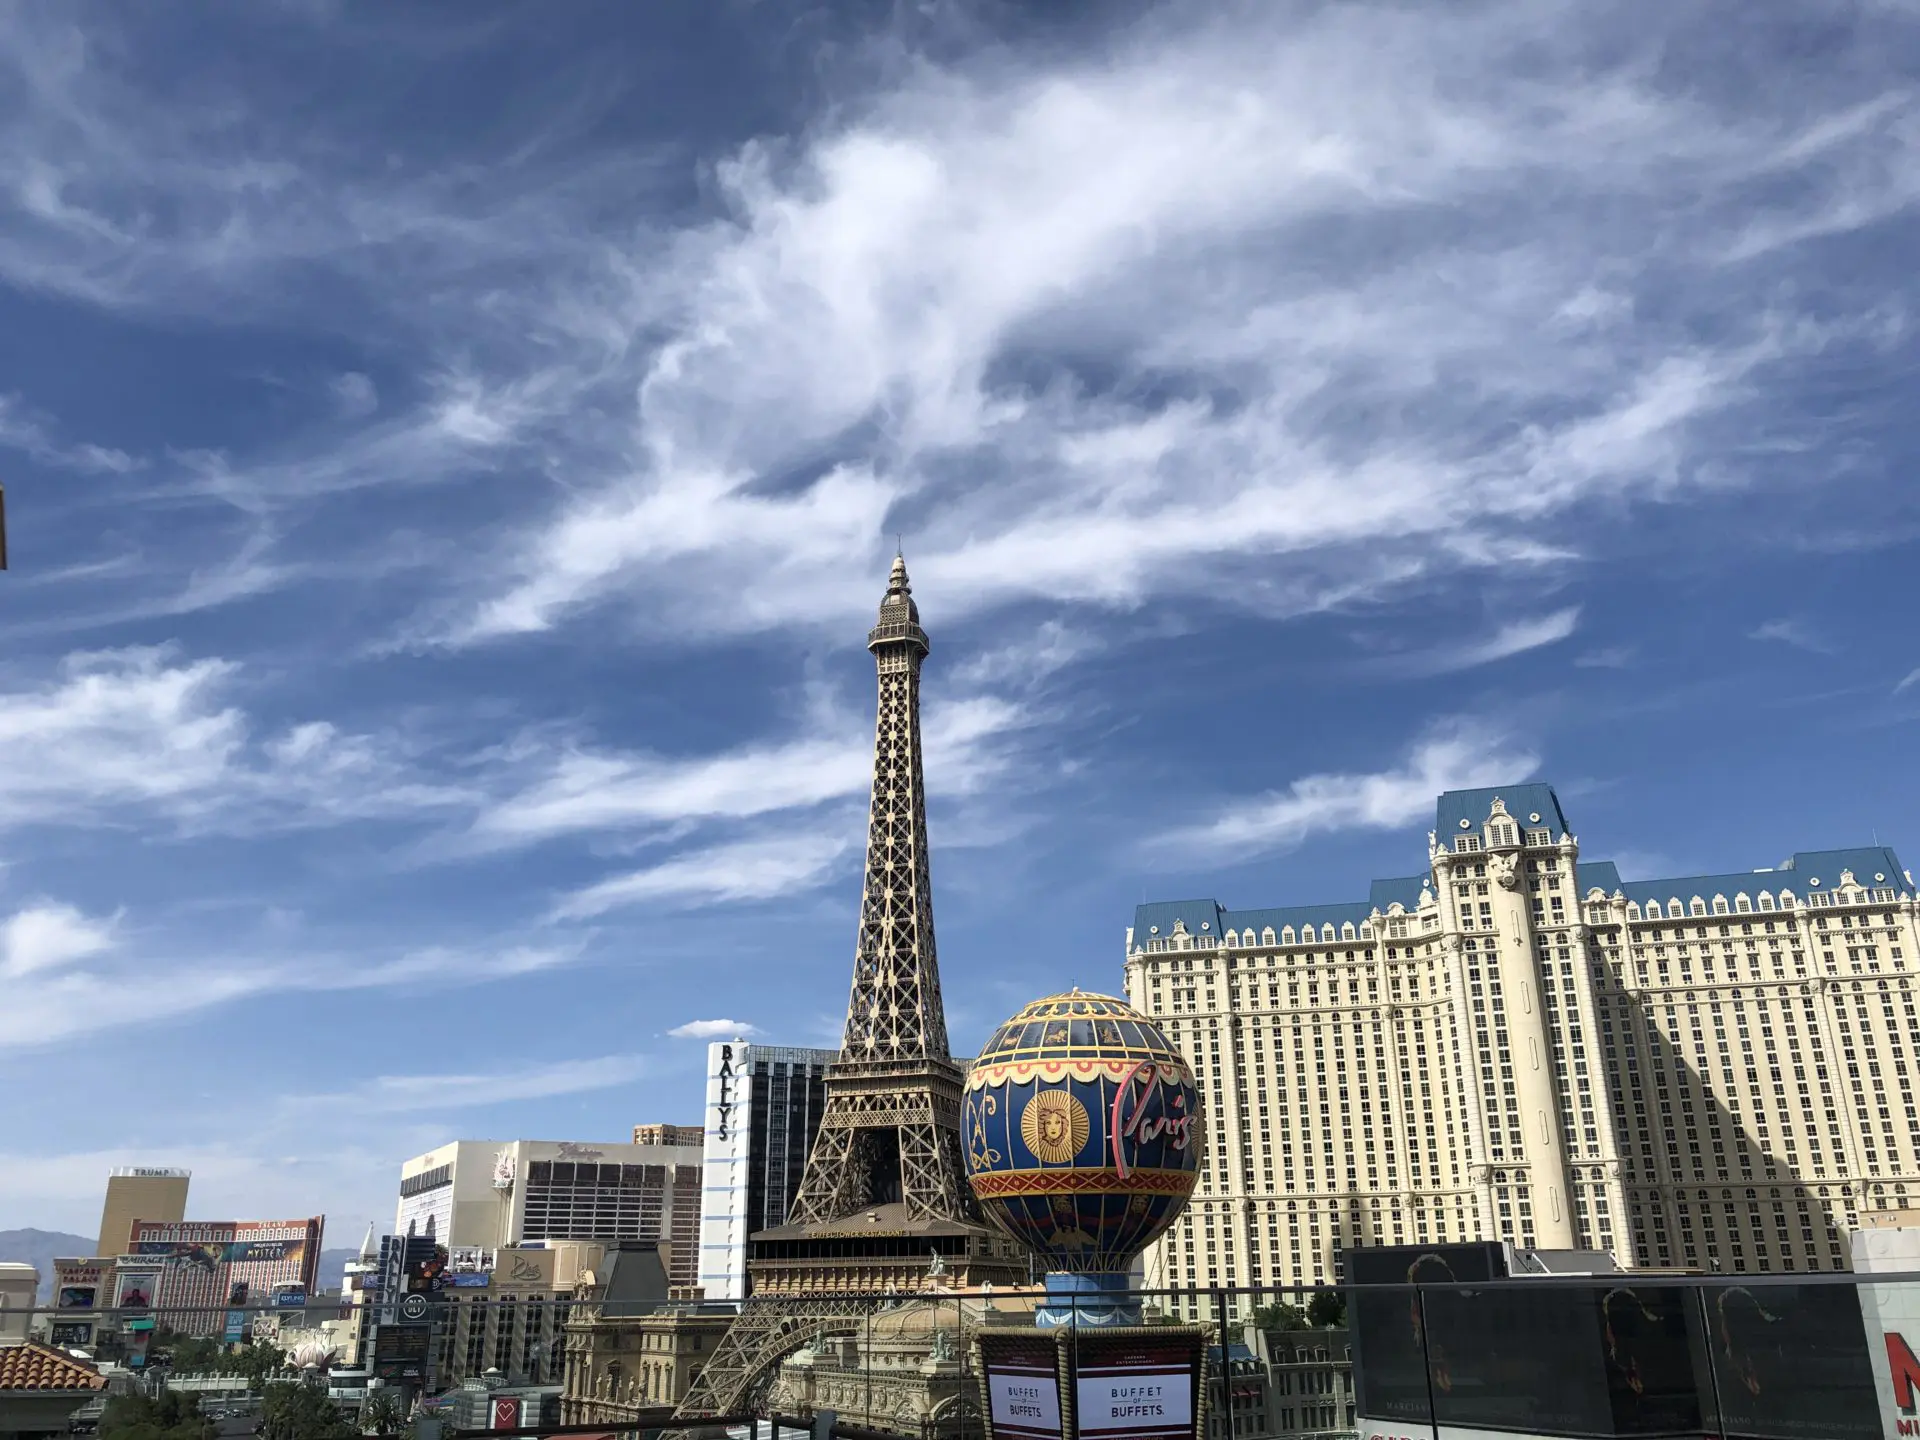 Eiffel Tower Experience at Paris Las Vegas- Did during the day